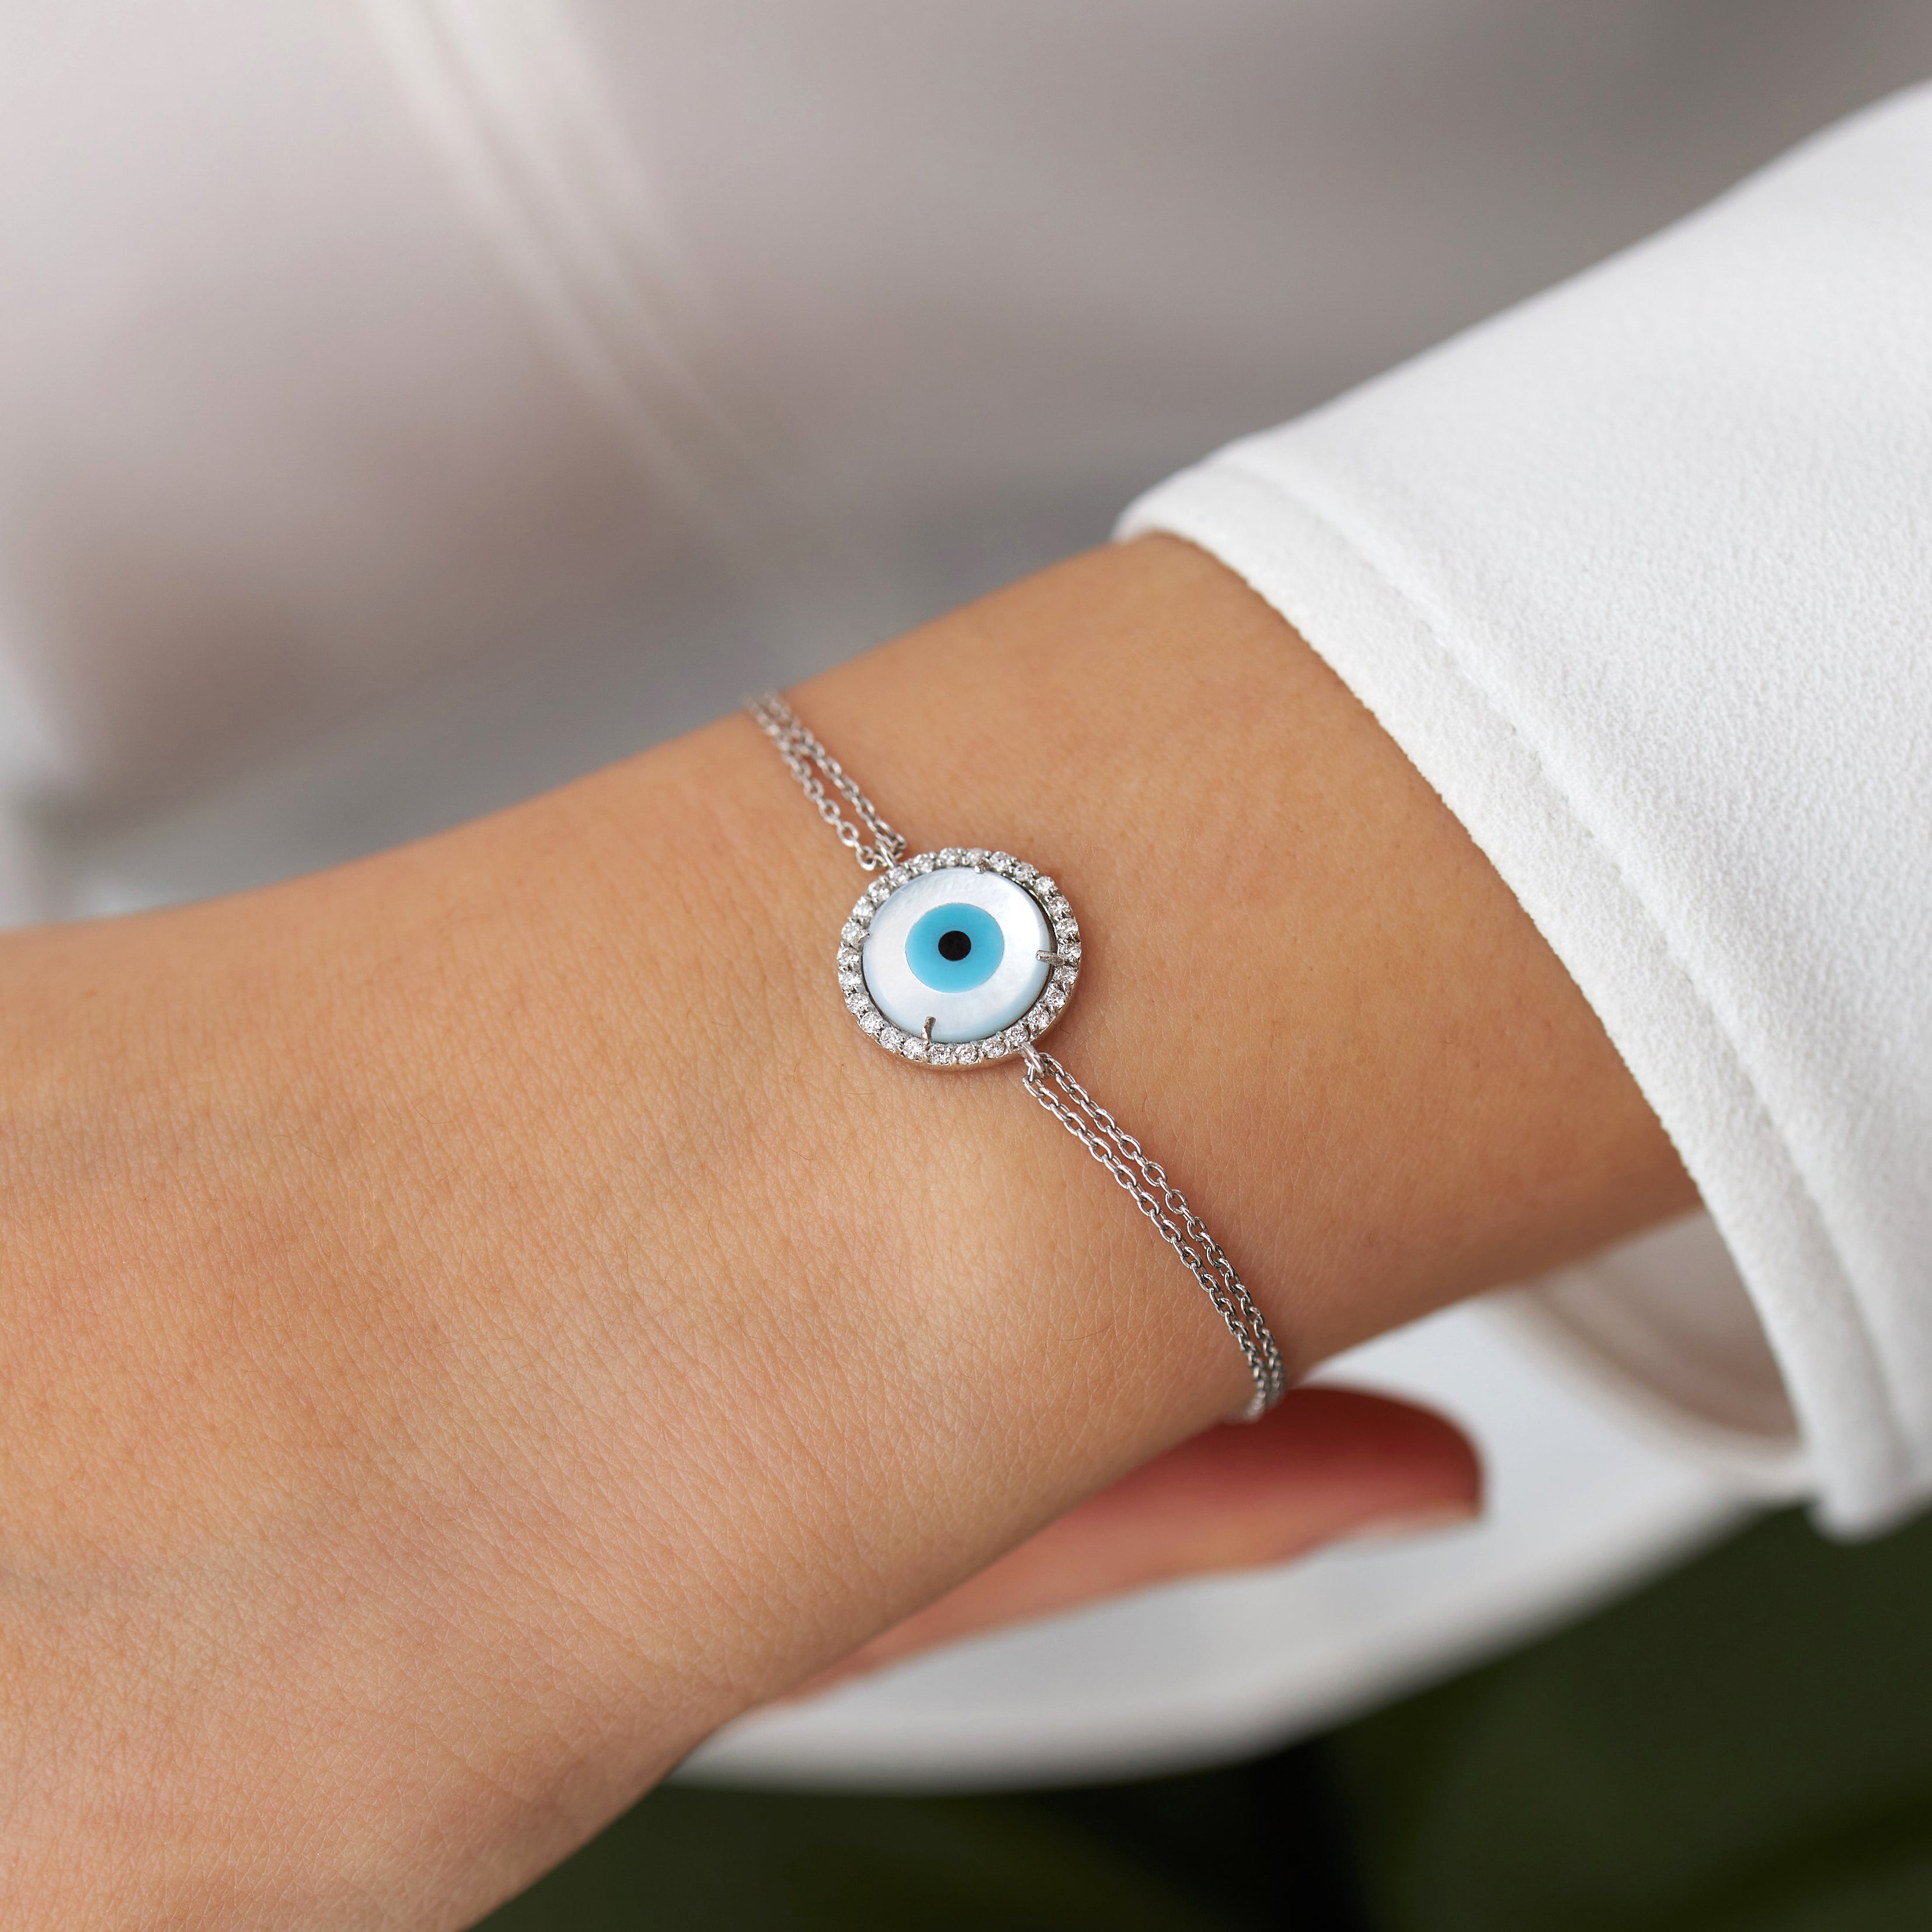 Diamond and Mother of Pearl Evil Eye Bracelet Available in 14K and 18K Gold